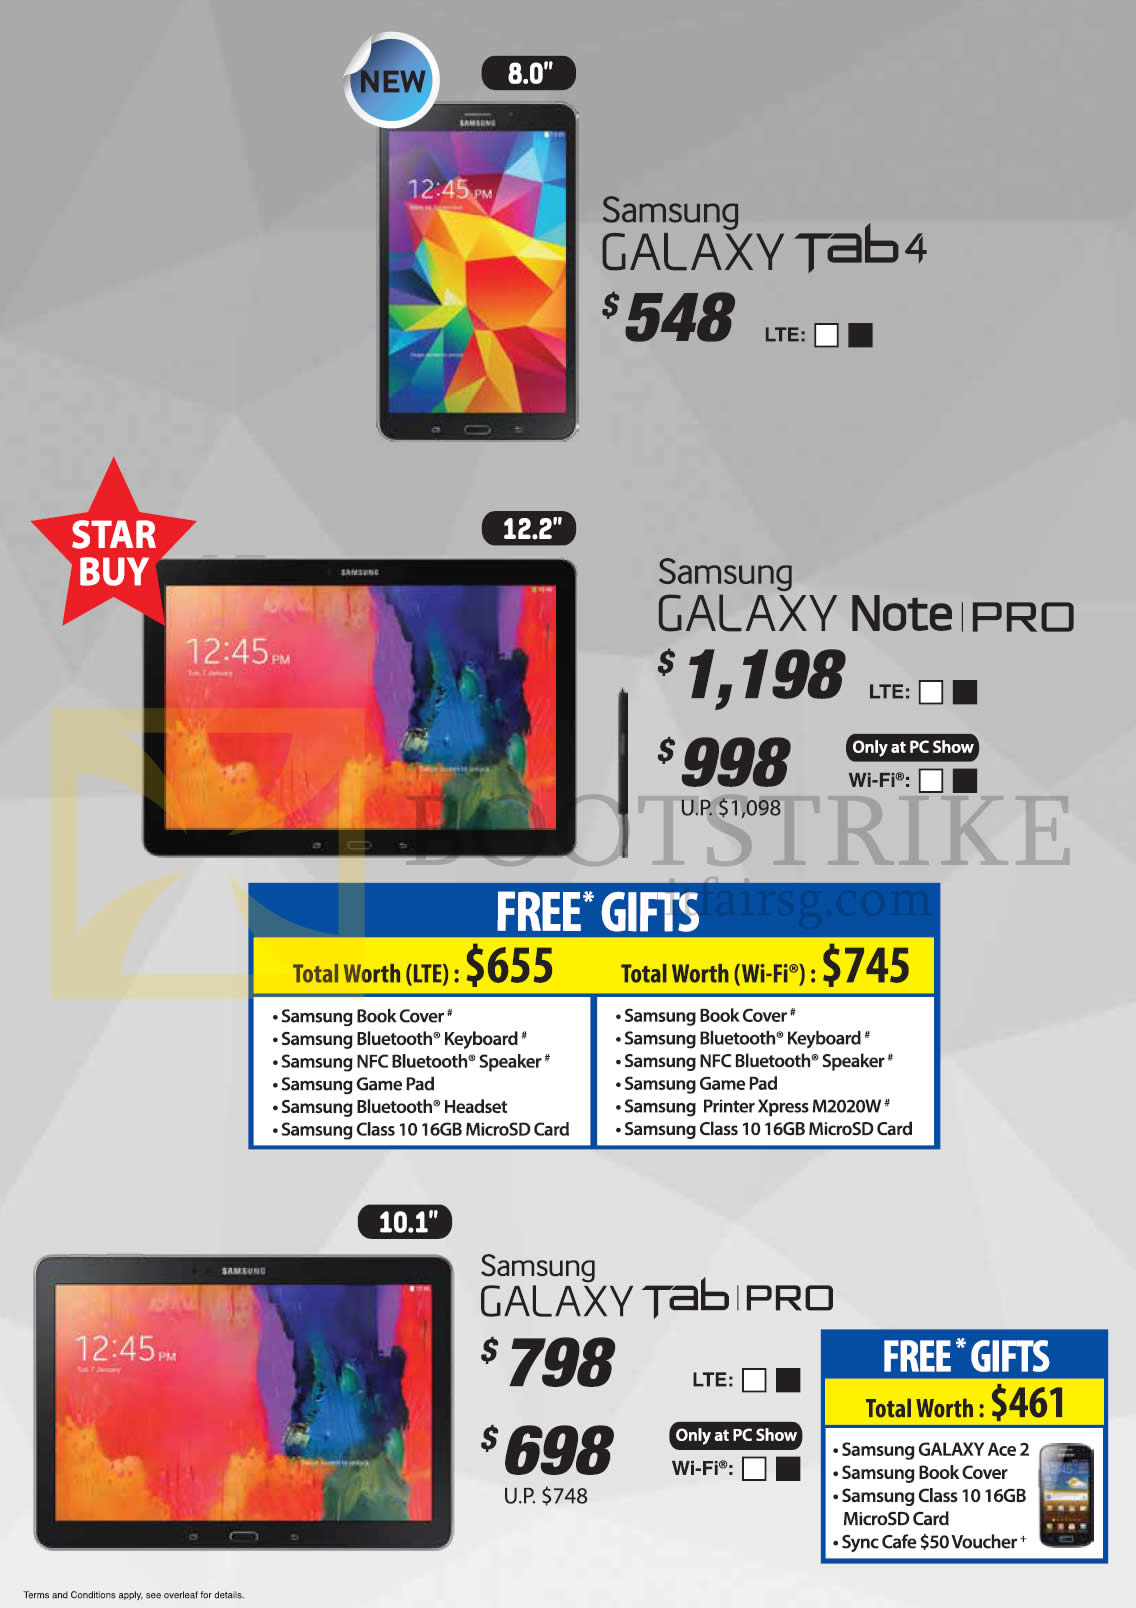 PC SHOW 2014 price list image brochure of Samsung Tablets Galaxy Tab 4 8.0, Note Pro 12.2, Tab Pro 10.1